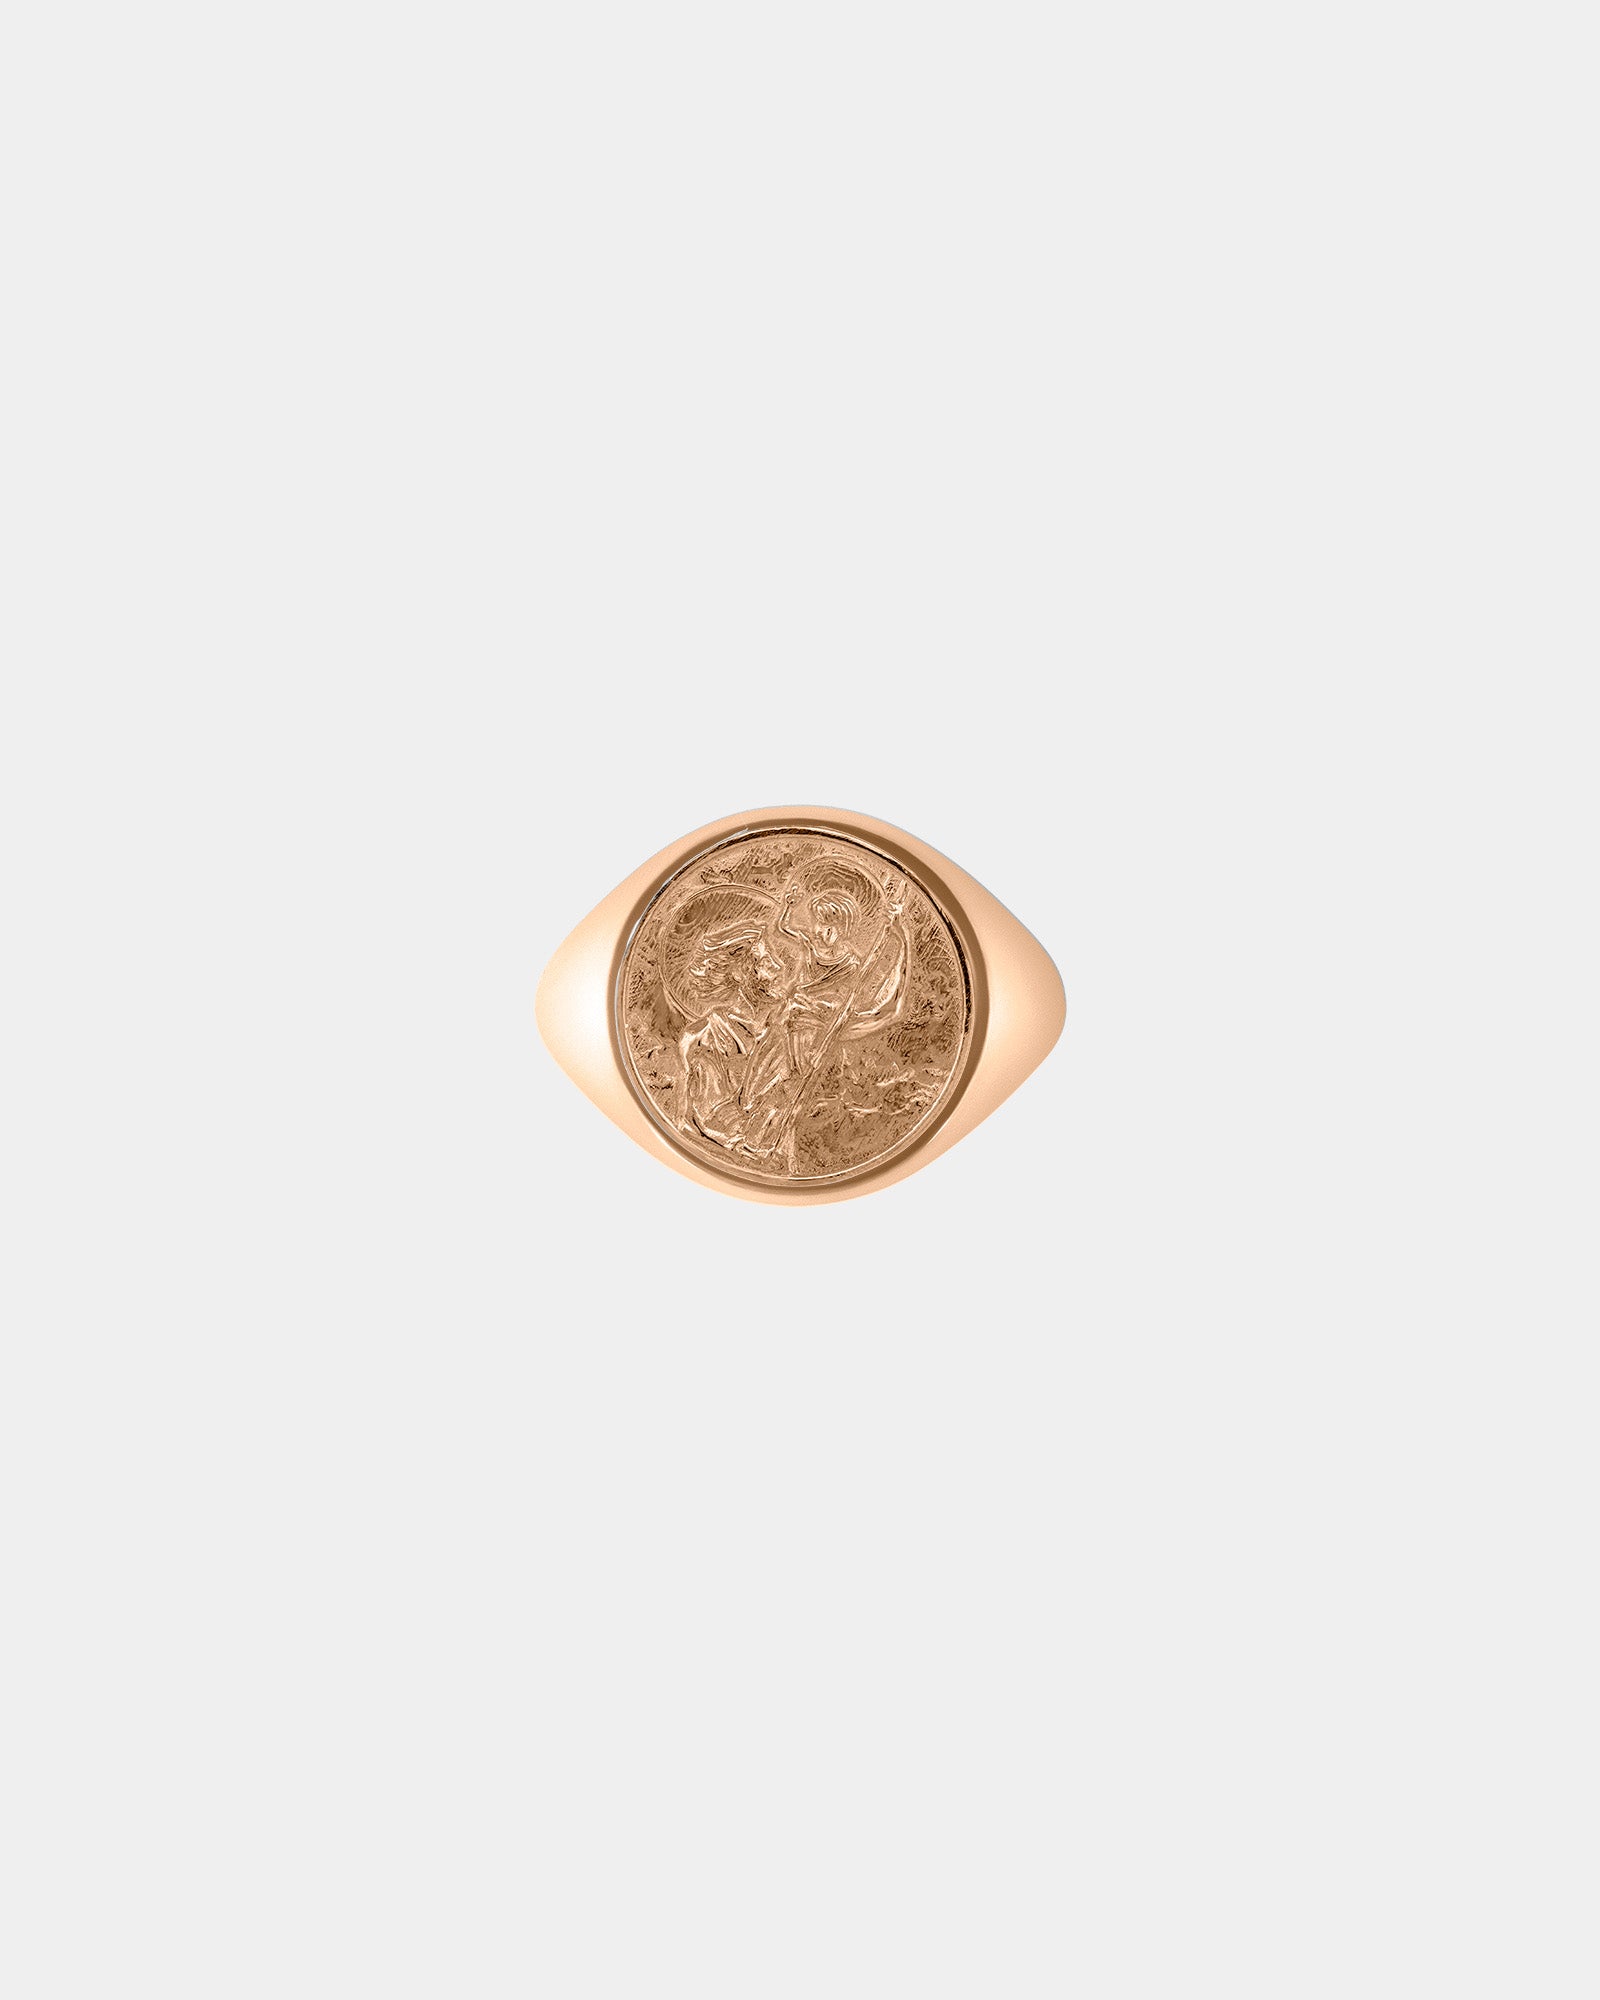 Large Saint Christopher Signet Ring in 9k Rose Gold by Wilson Grant